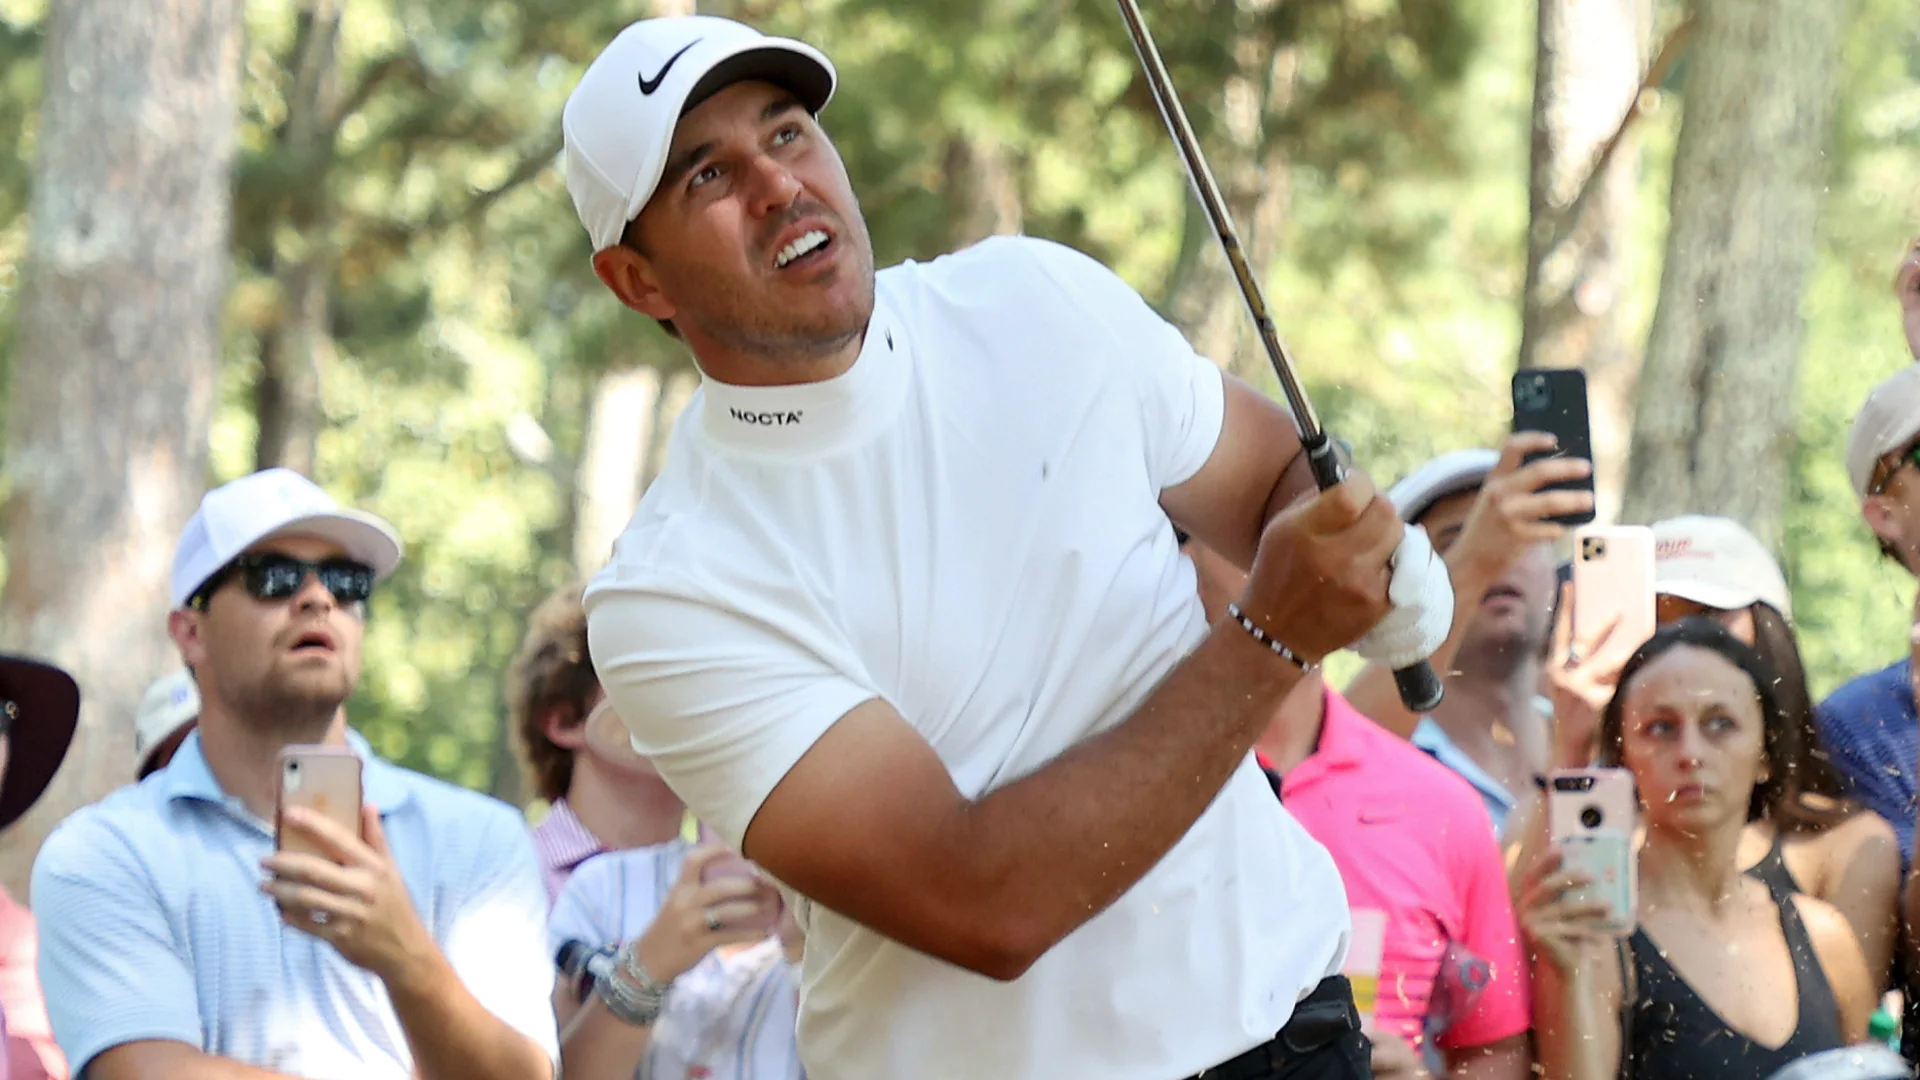 After left wrist injury, Brooks Koepka says he’s ‘good to go’ for Ryder Cup